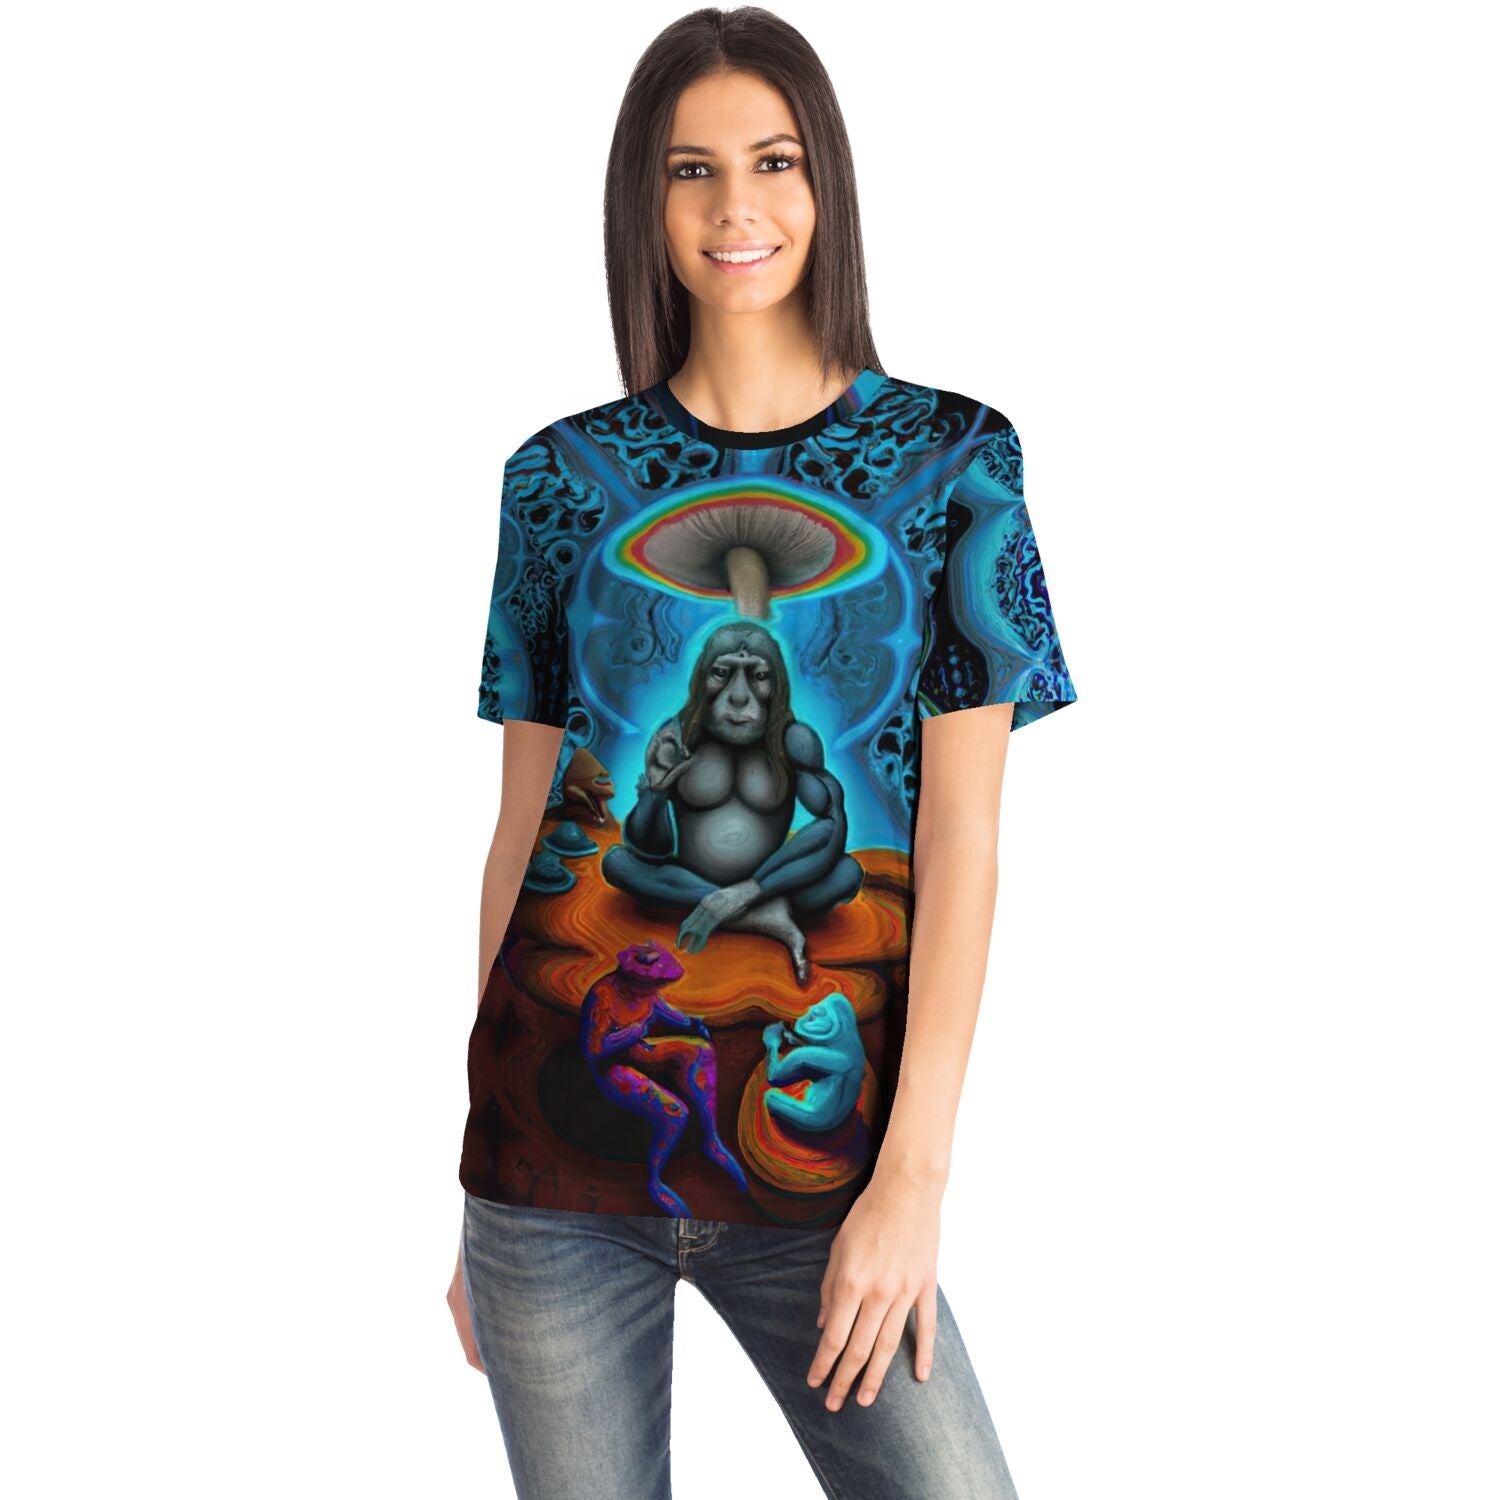 Stoned Ape Theory | Psychedelic Evolution | DMT, LSD, Ayahuasca, McKenna | Trippy Digital Art T-Shirt - Sacred Surreal